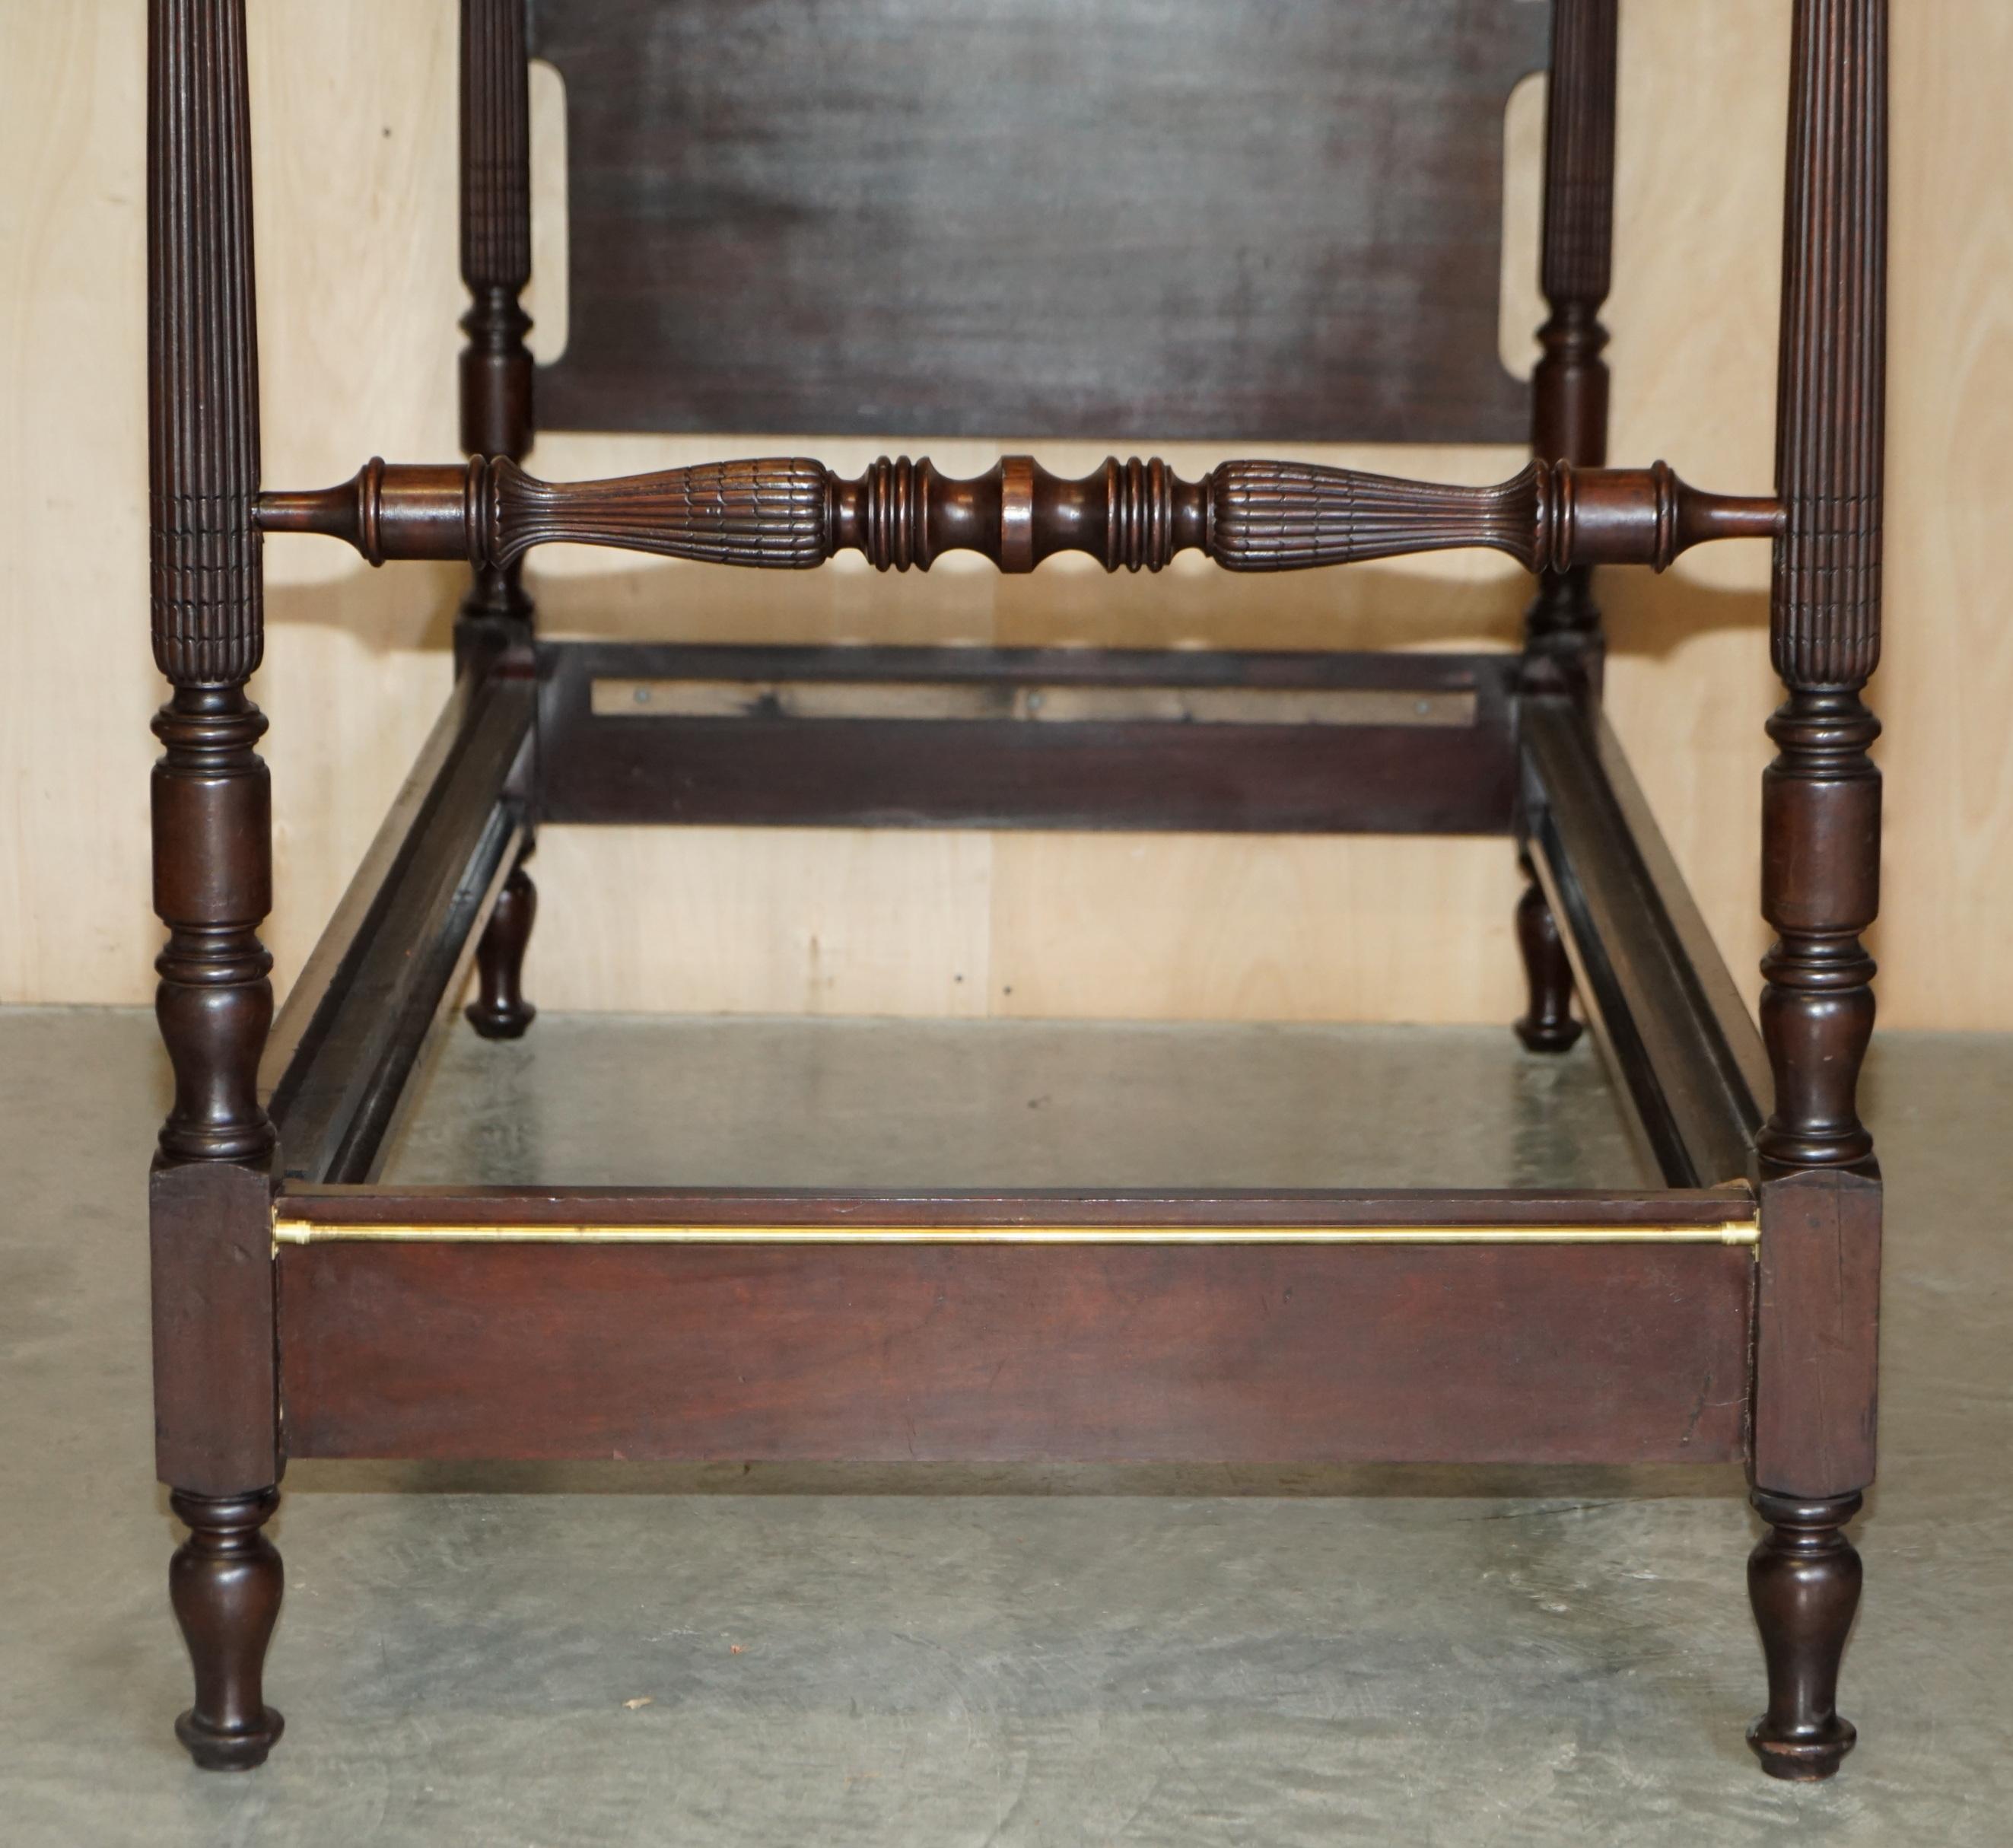 Early 19th Century Circa 1800 American Federal Hardwood Four Poster Bed Frame with Carved Pillars For Sale